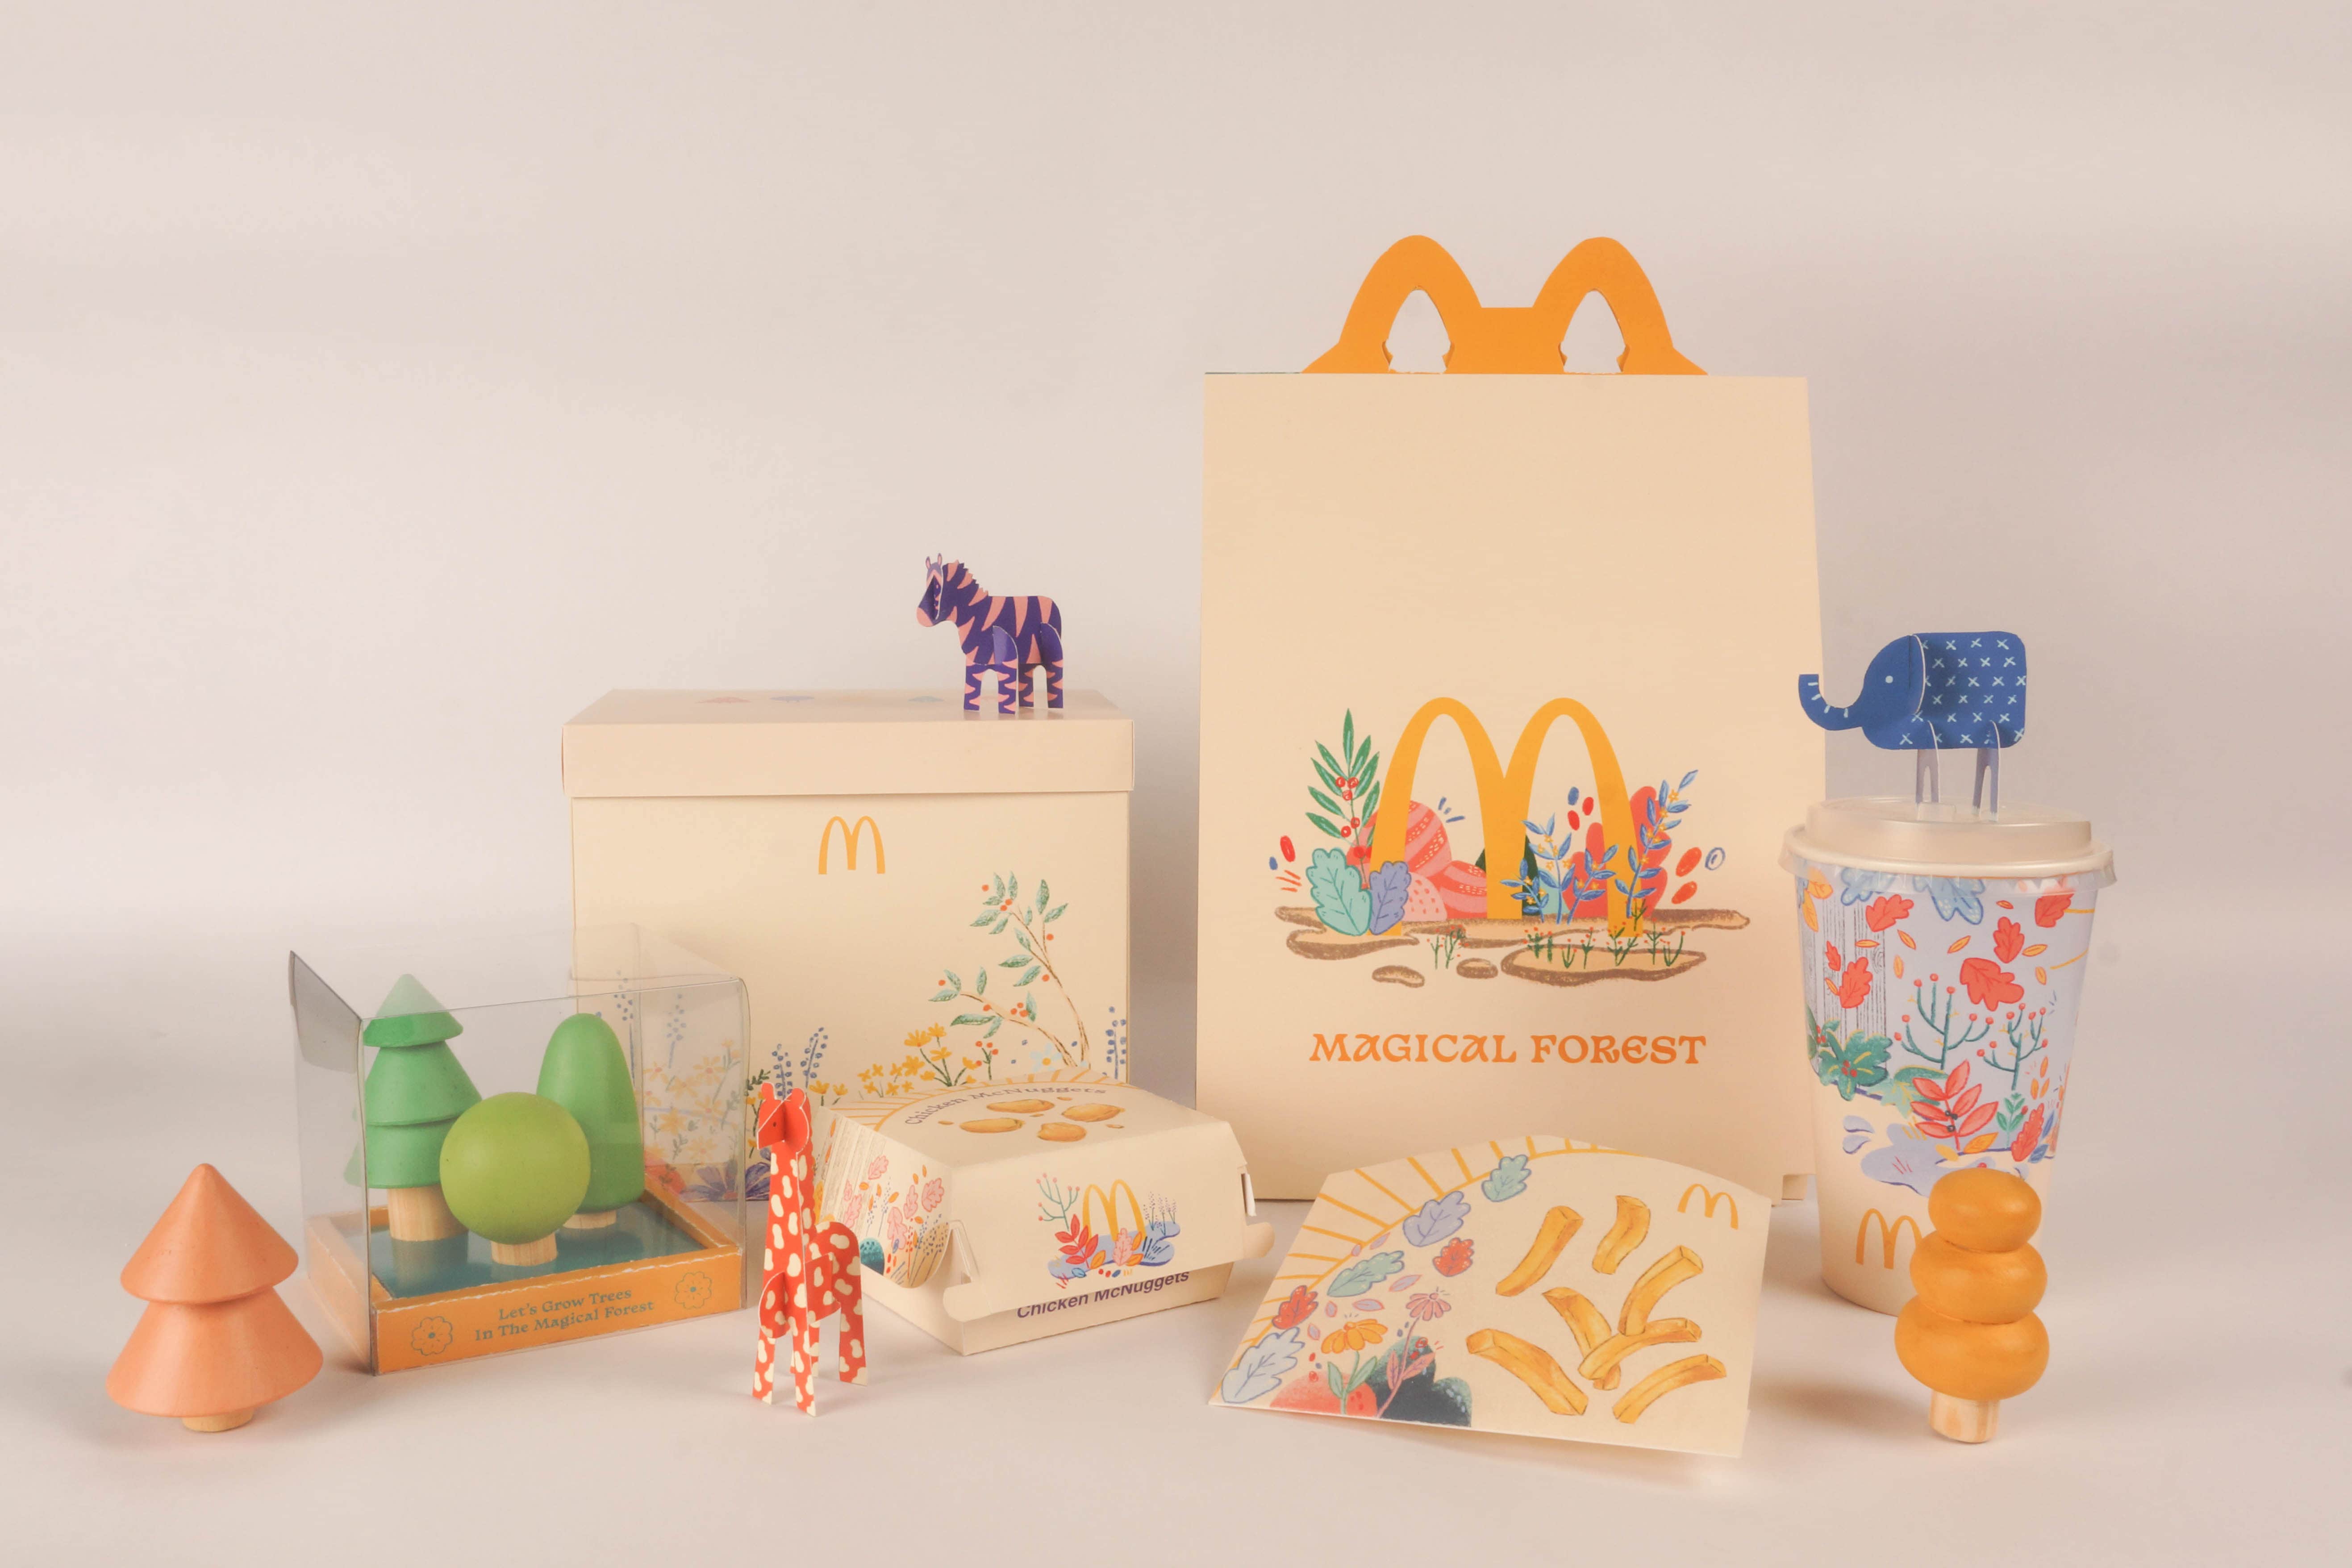 Magical Forest McDonalds Happier Meal Created by Student Regina Lim